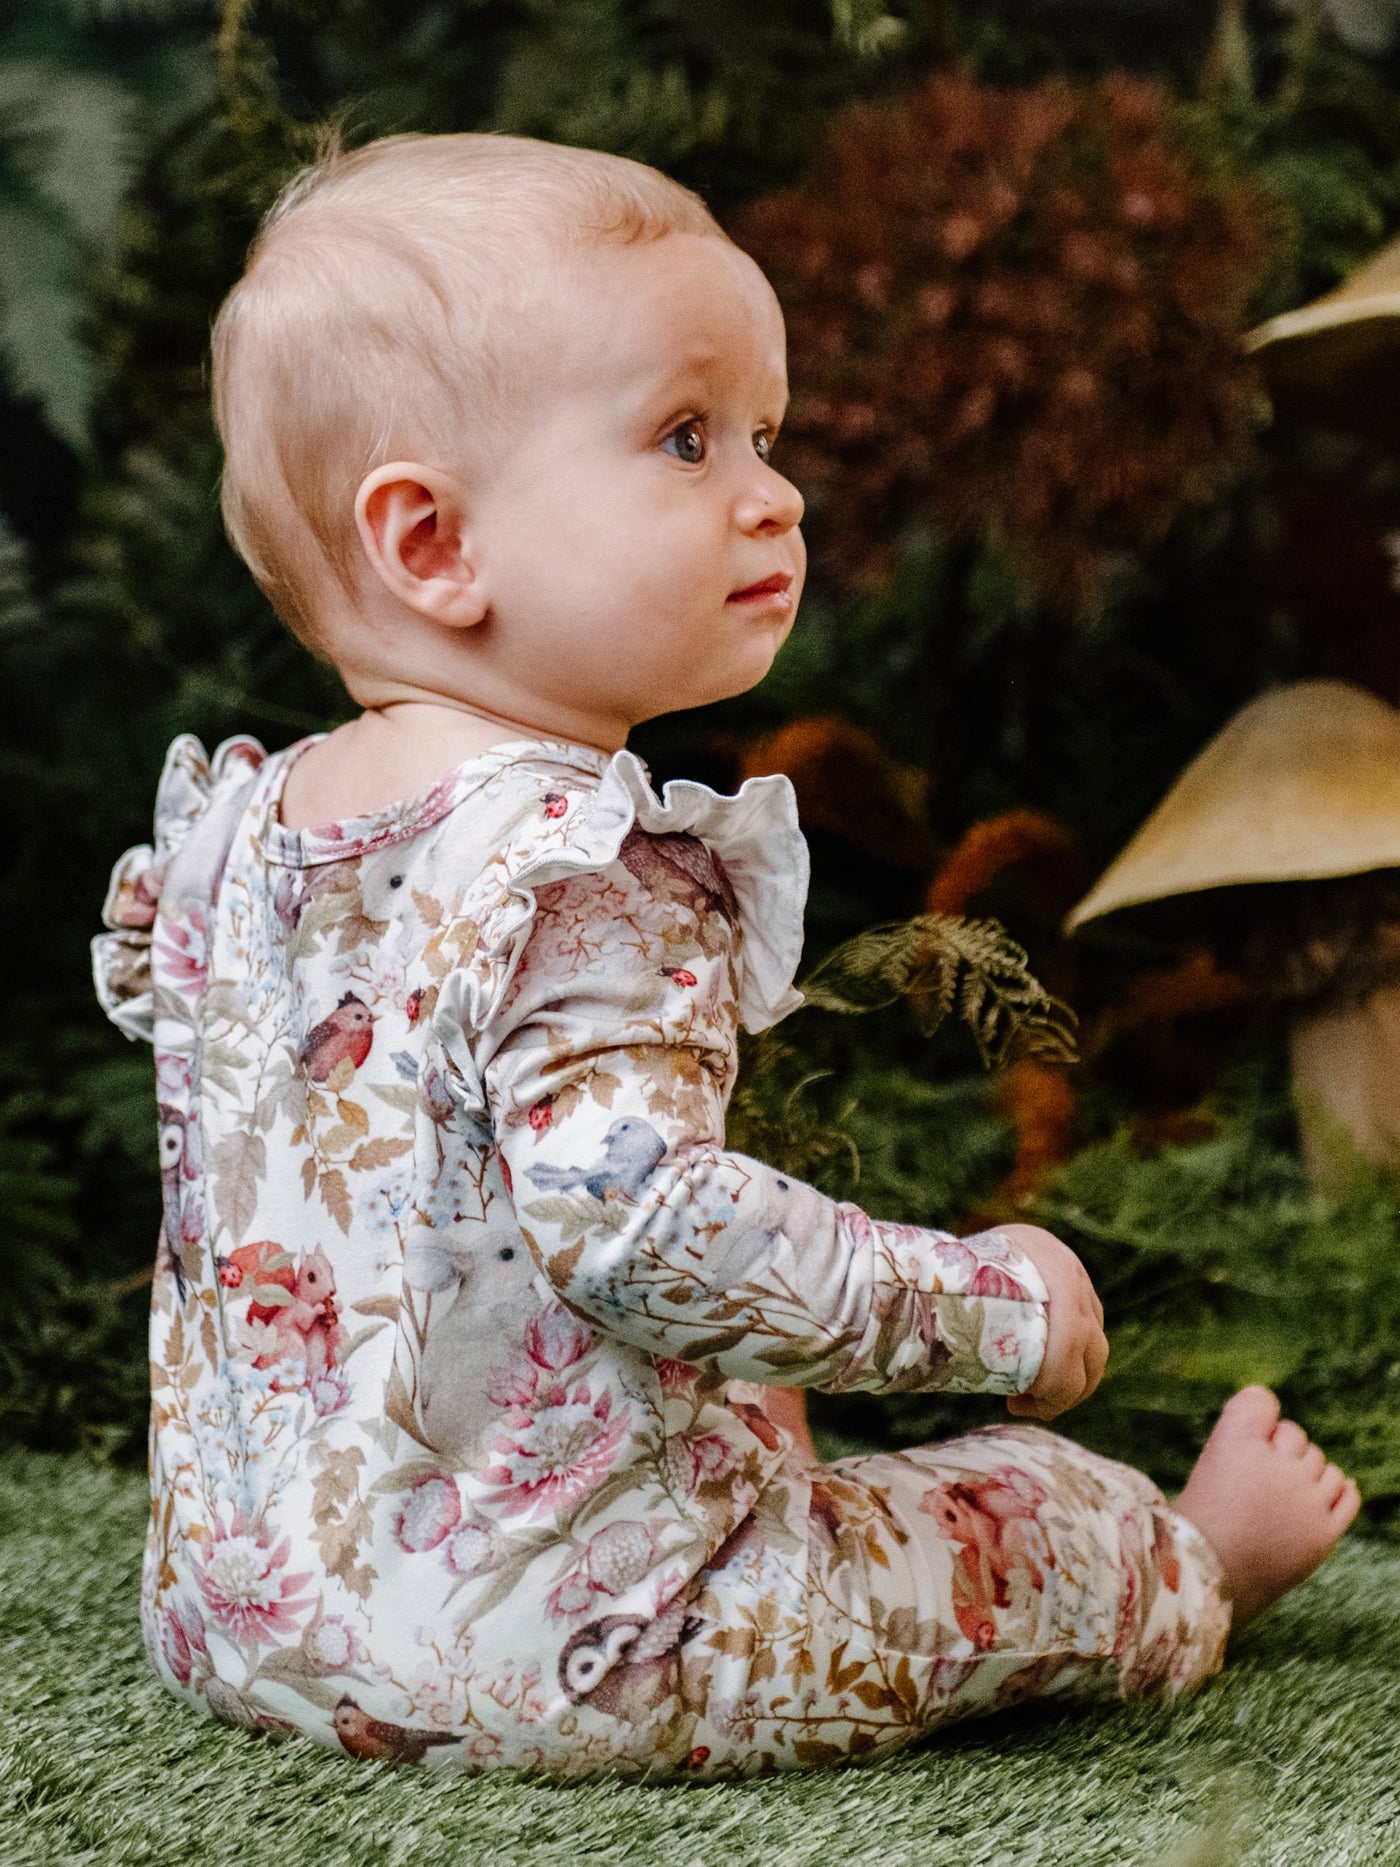 'Woodlands' Precious Frill Coverall - Marshmallow